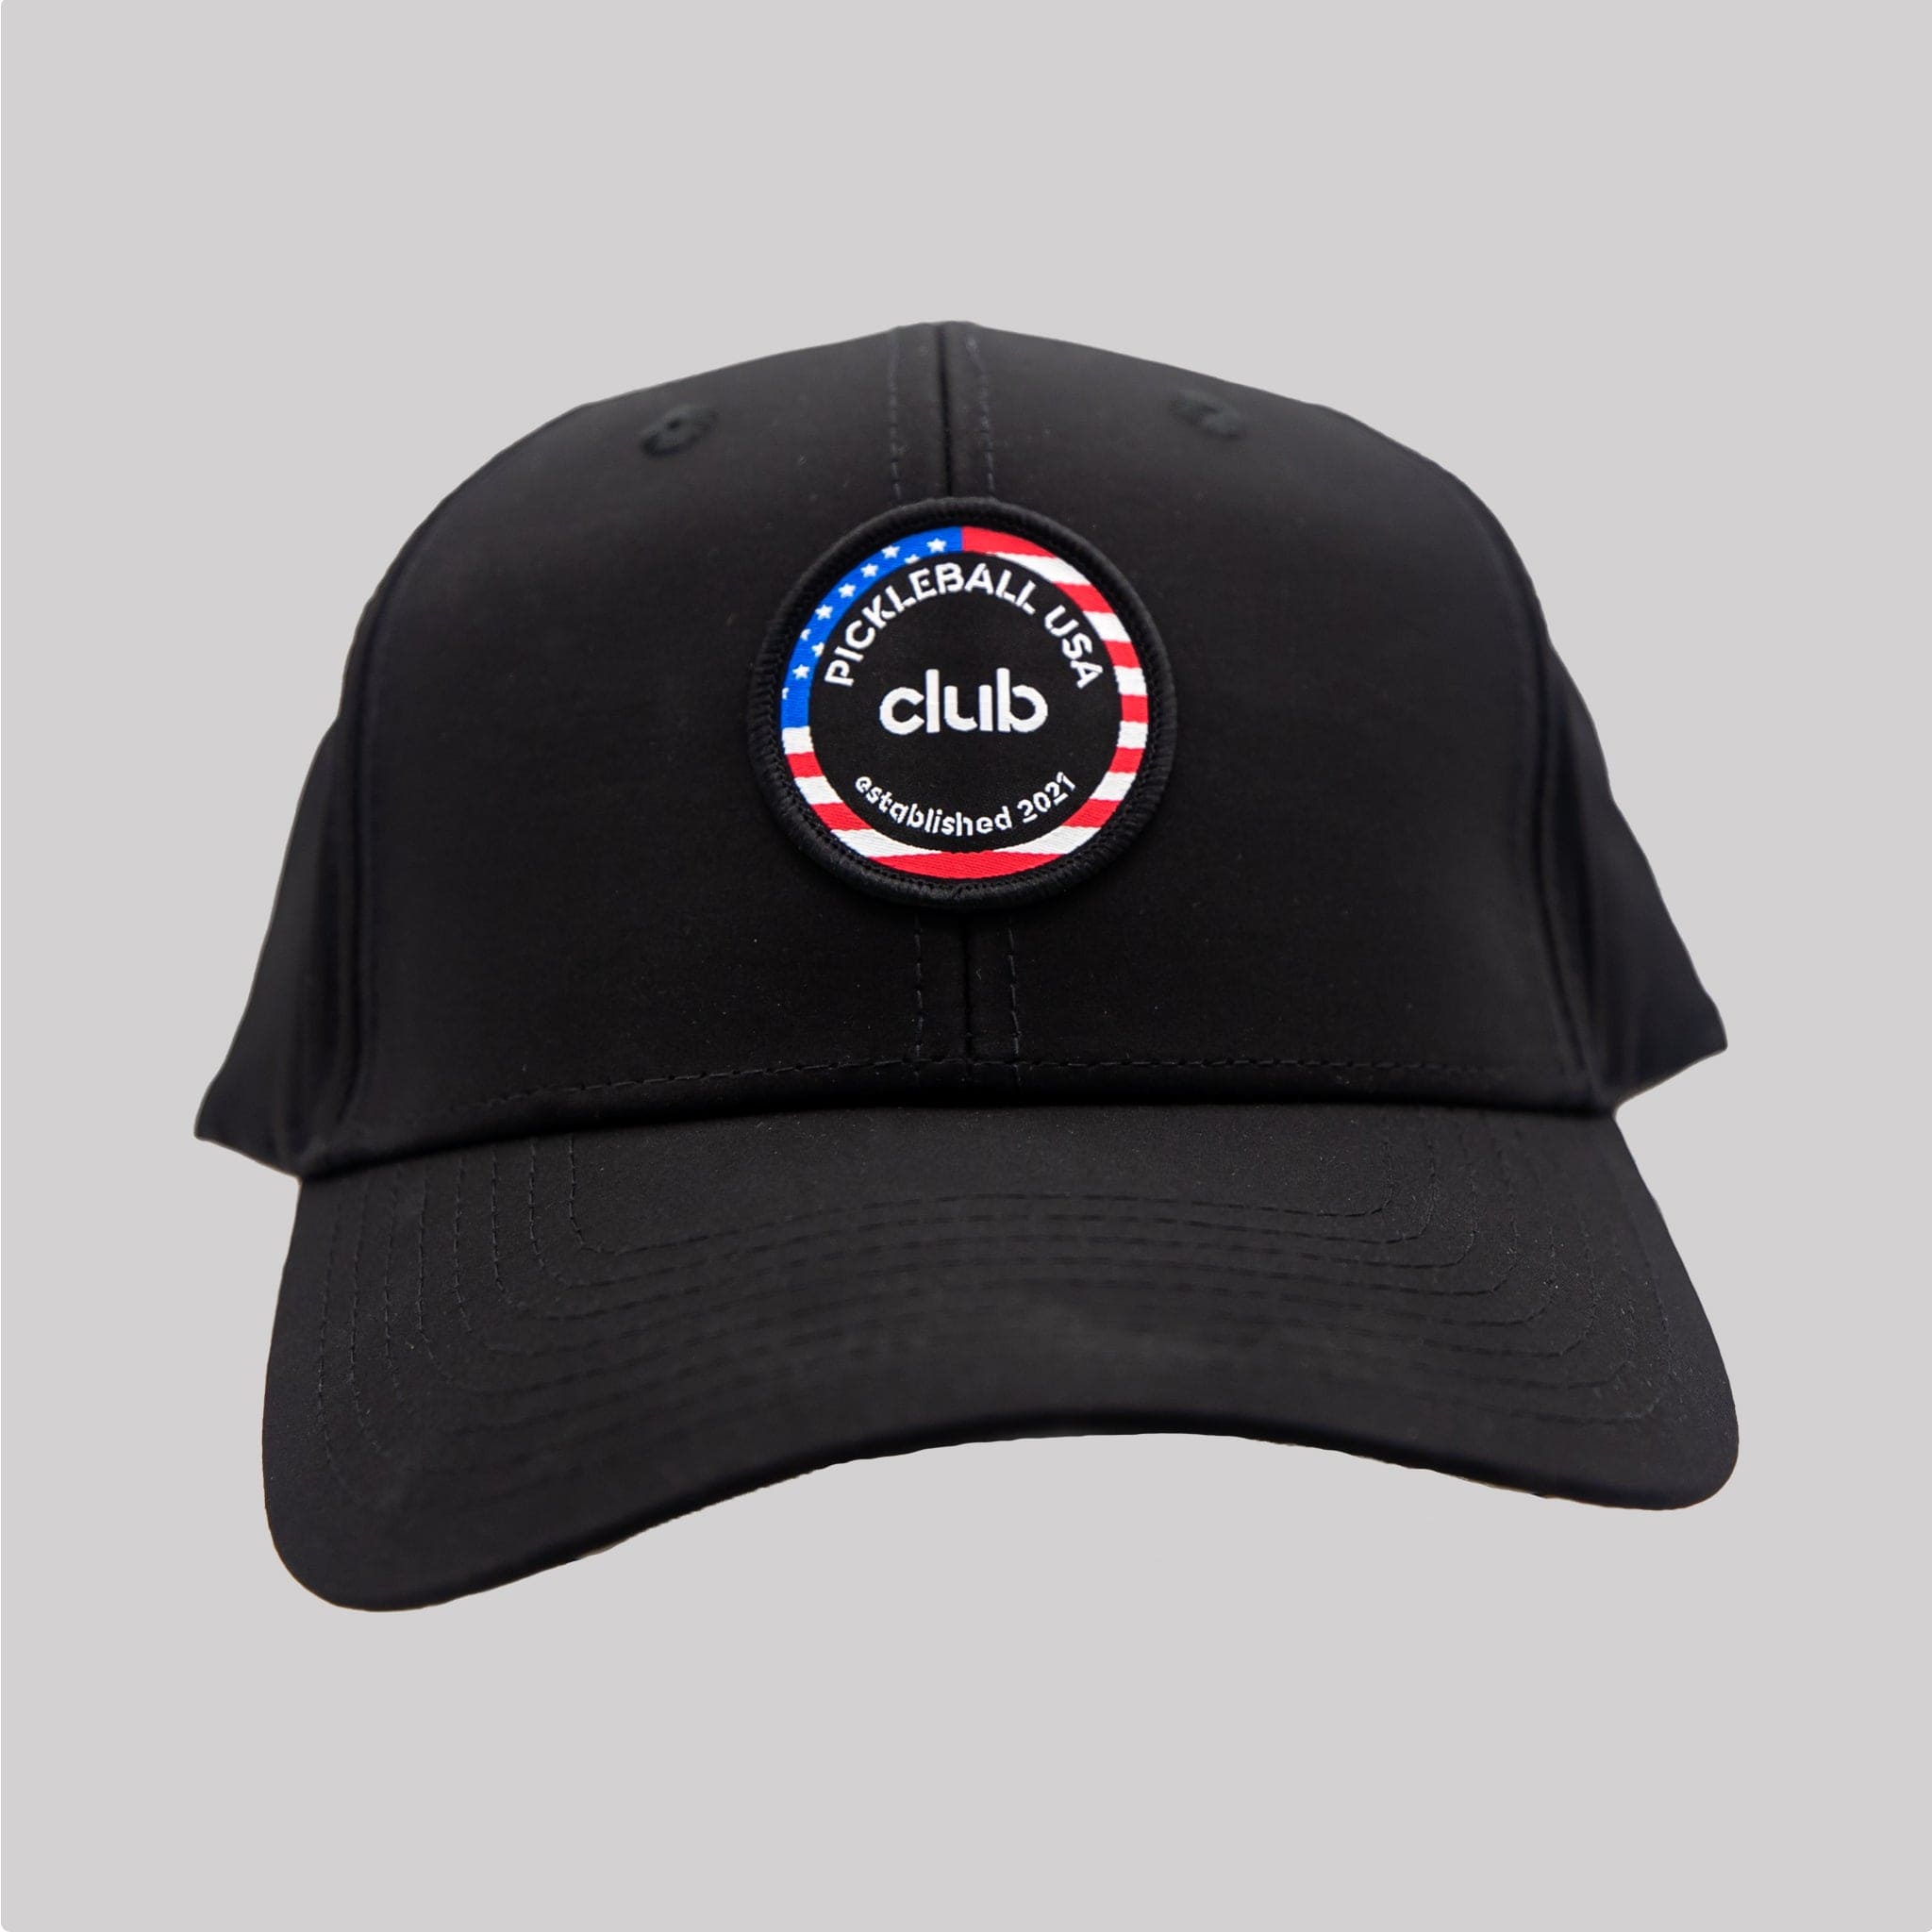 New Club Hat - Black with Red White and Blue Patch